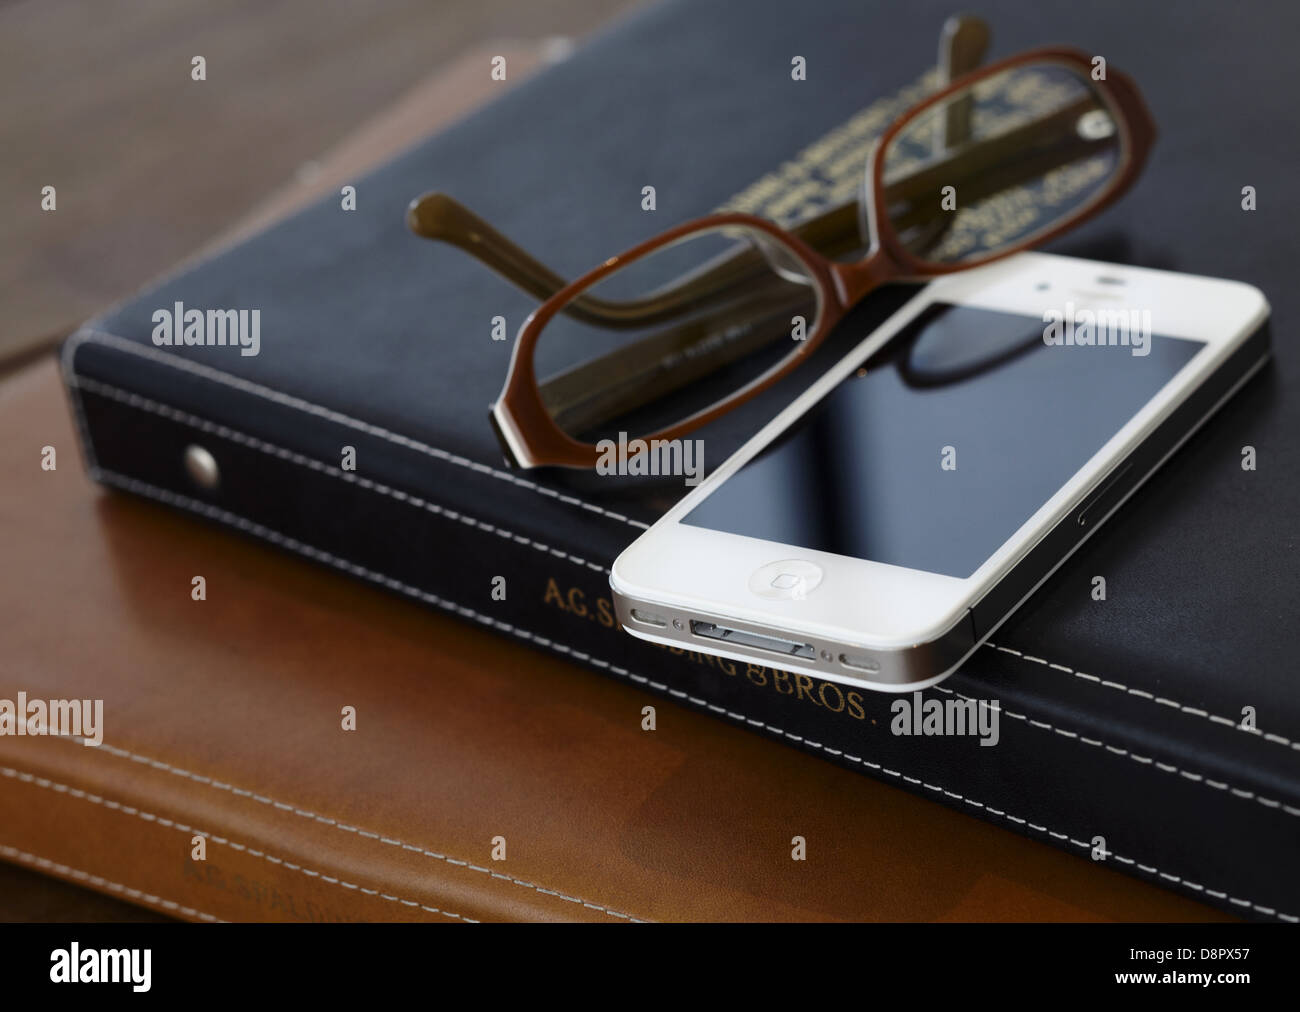 Binder notebook, eye glasses and a smartphone Stock Photo